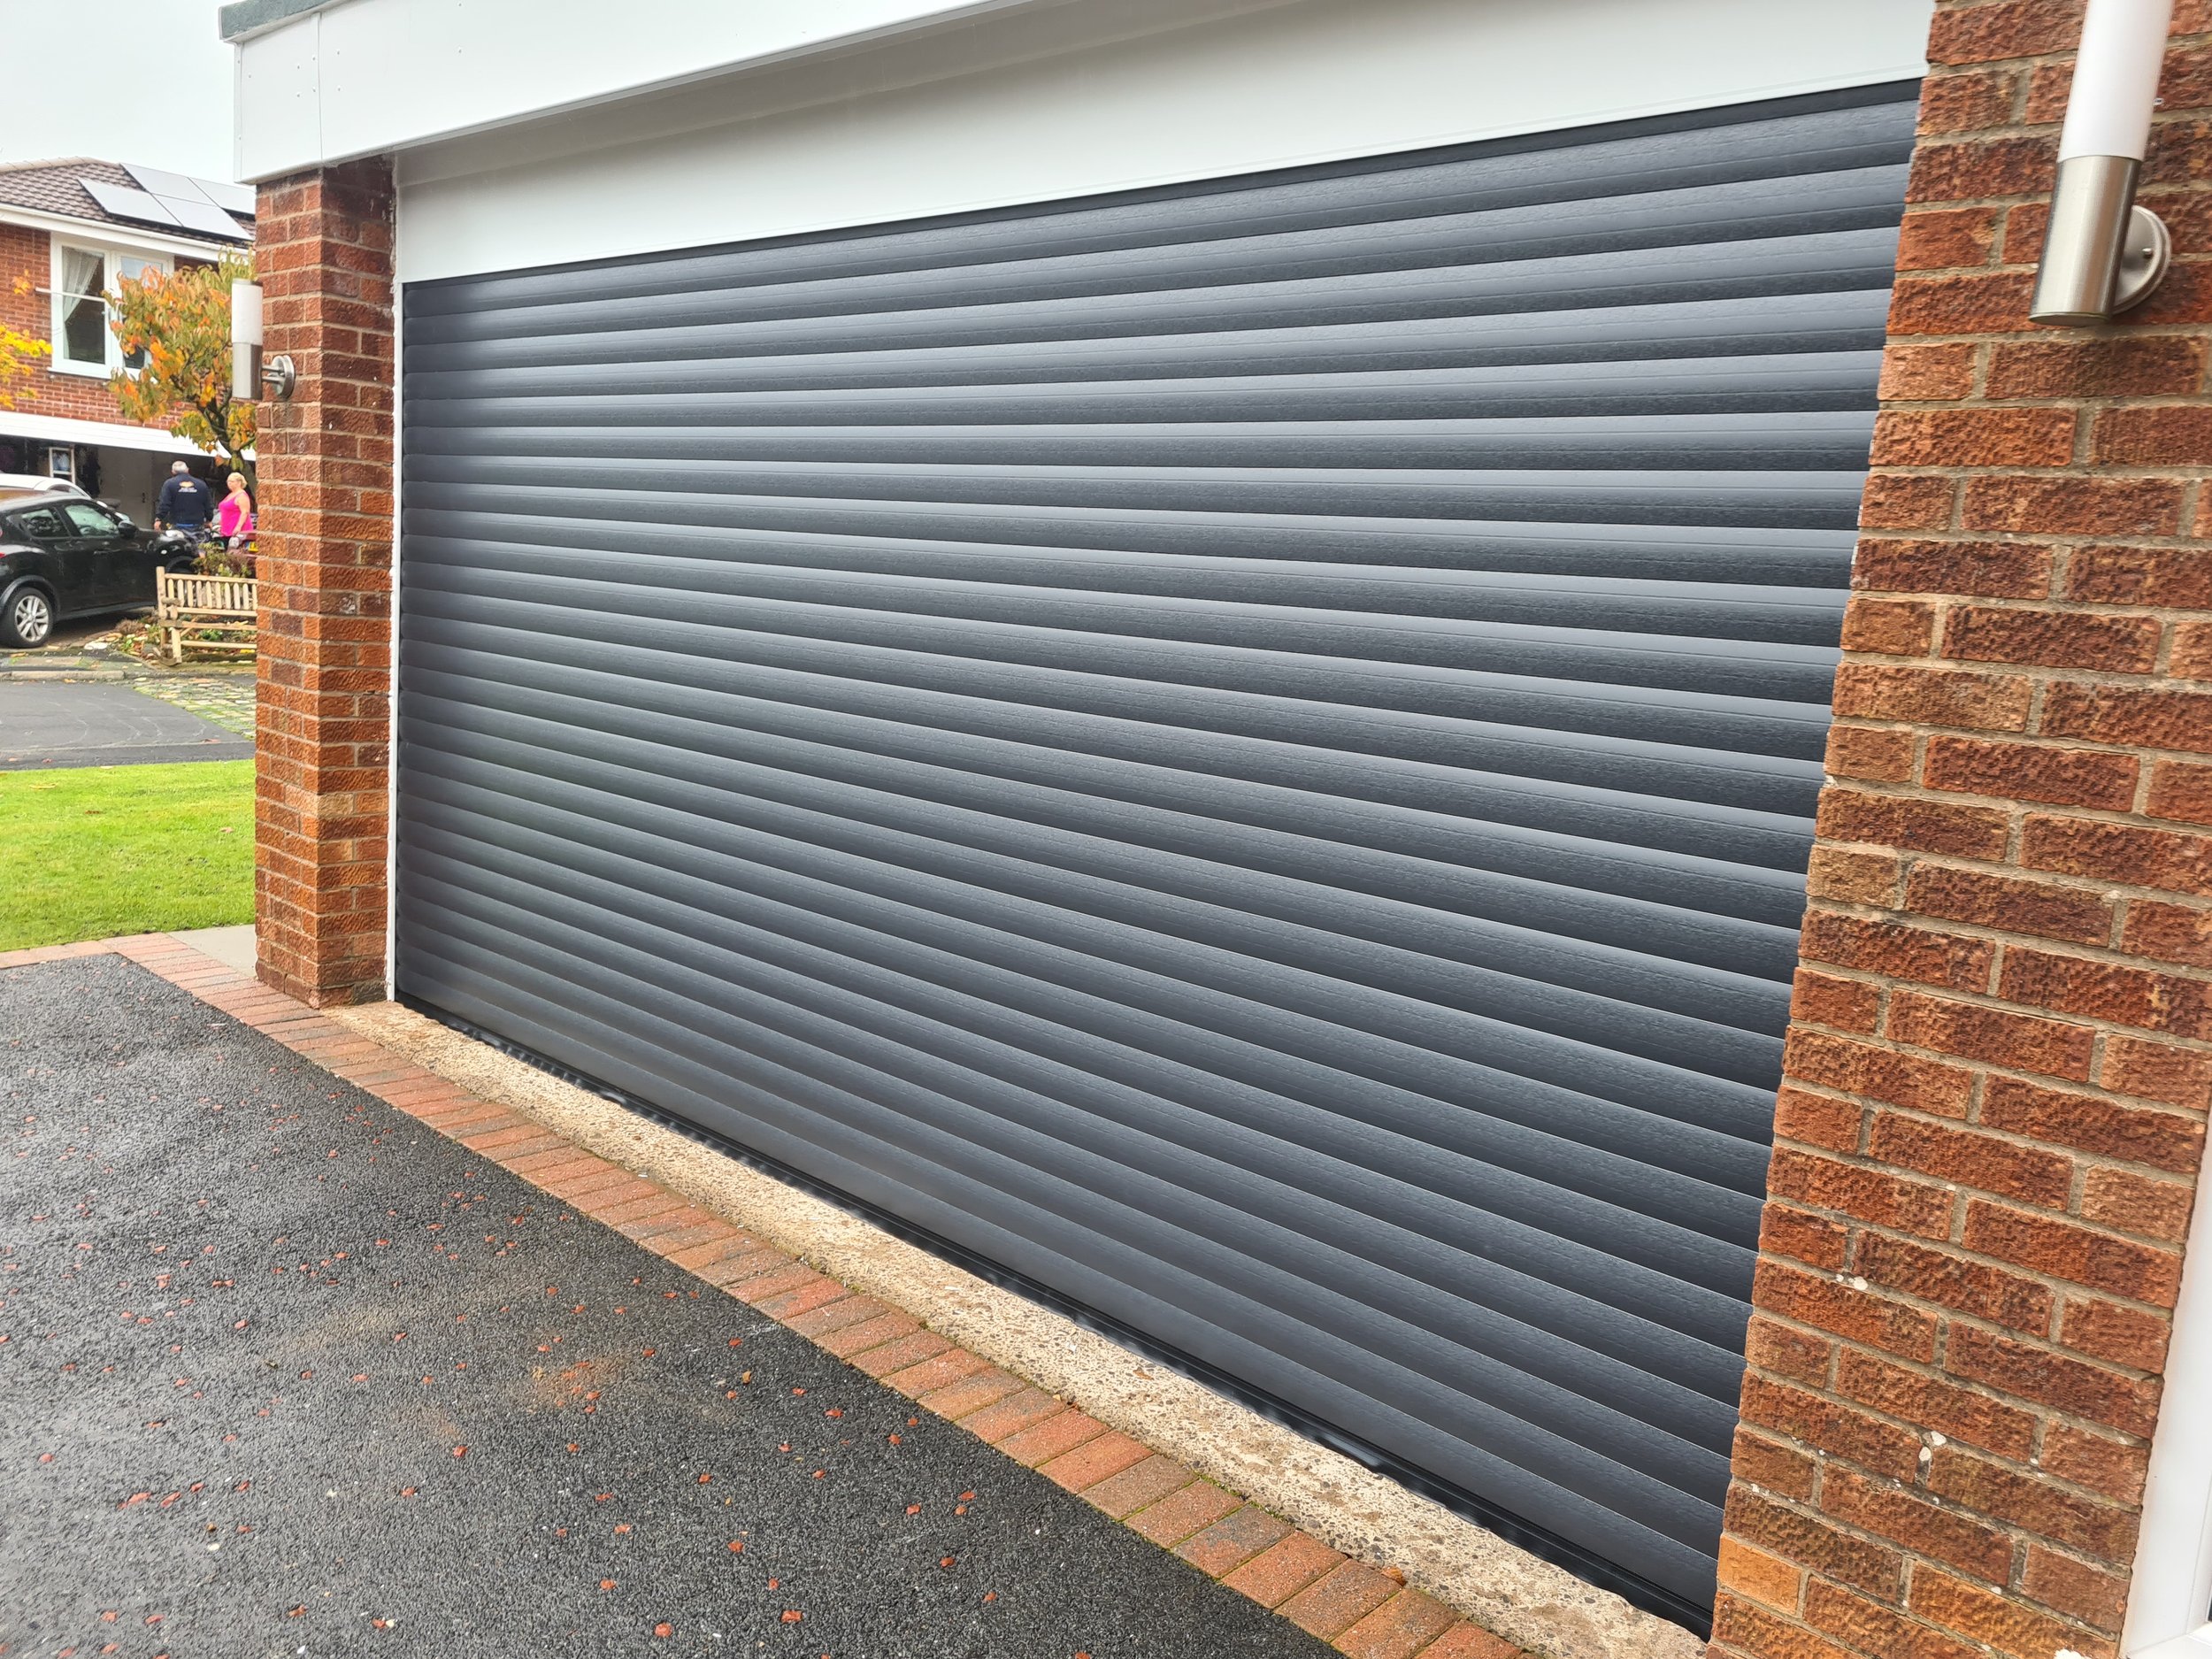 Uk Doors Midlands Classic 77m fully insulated roller garage door in Textured Anthracite grey W/ white frame